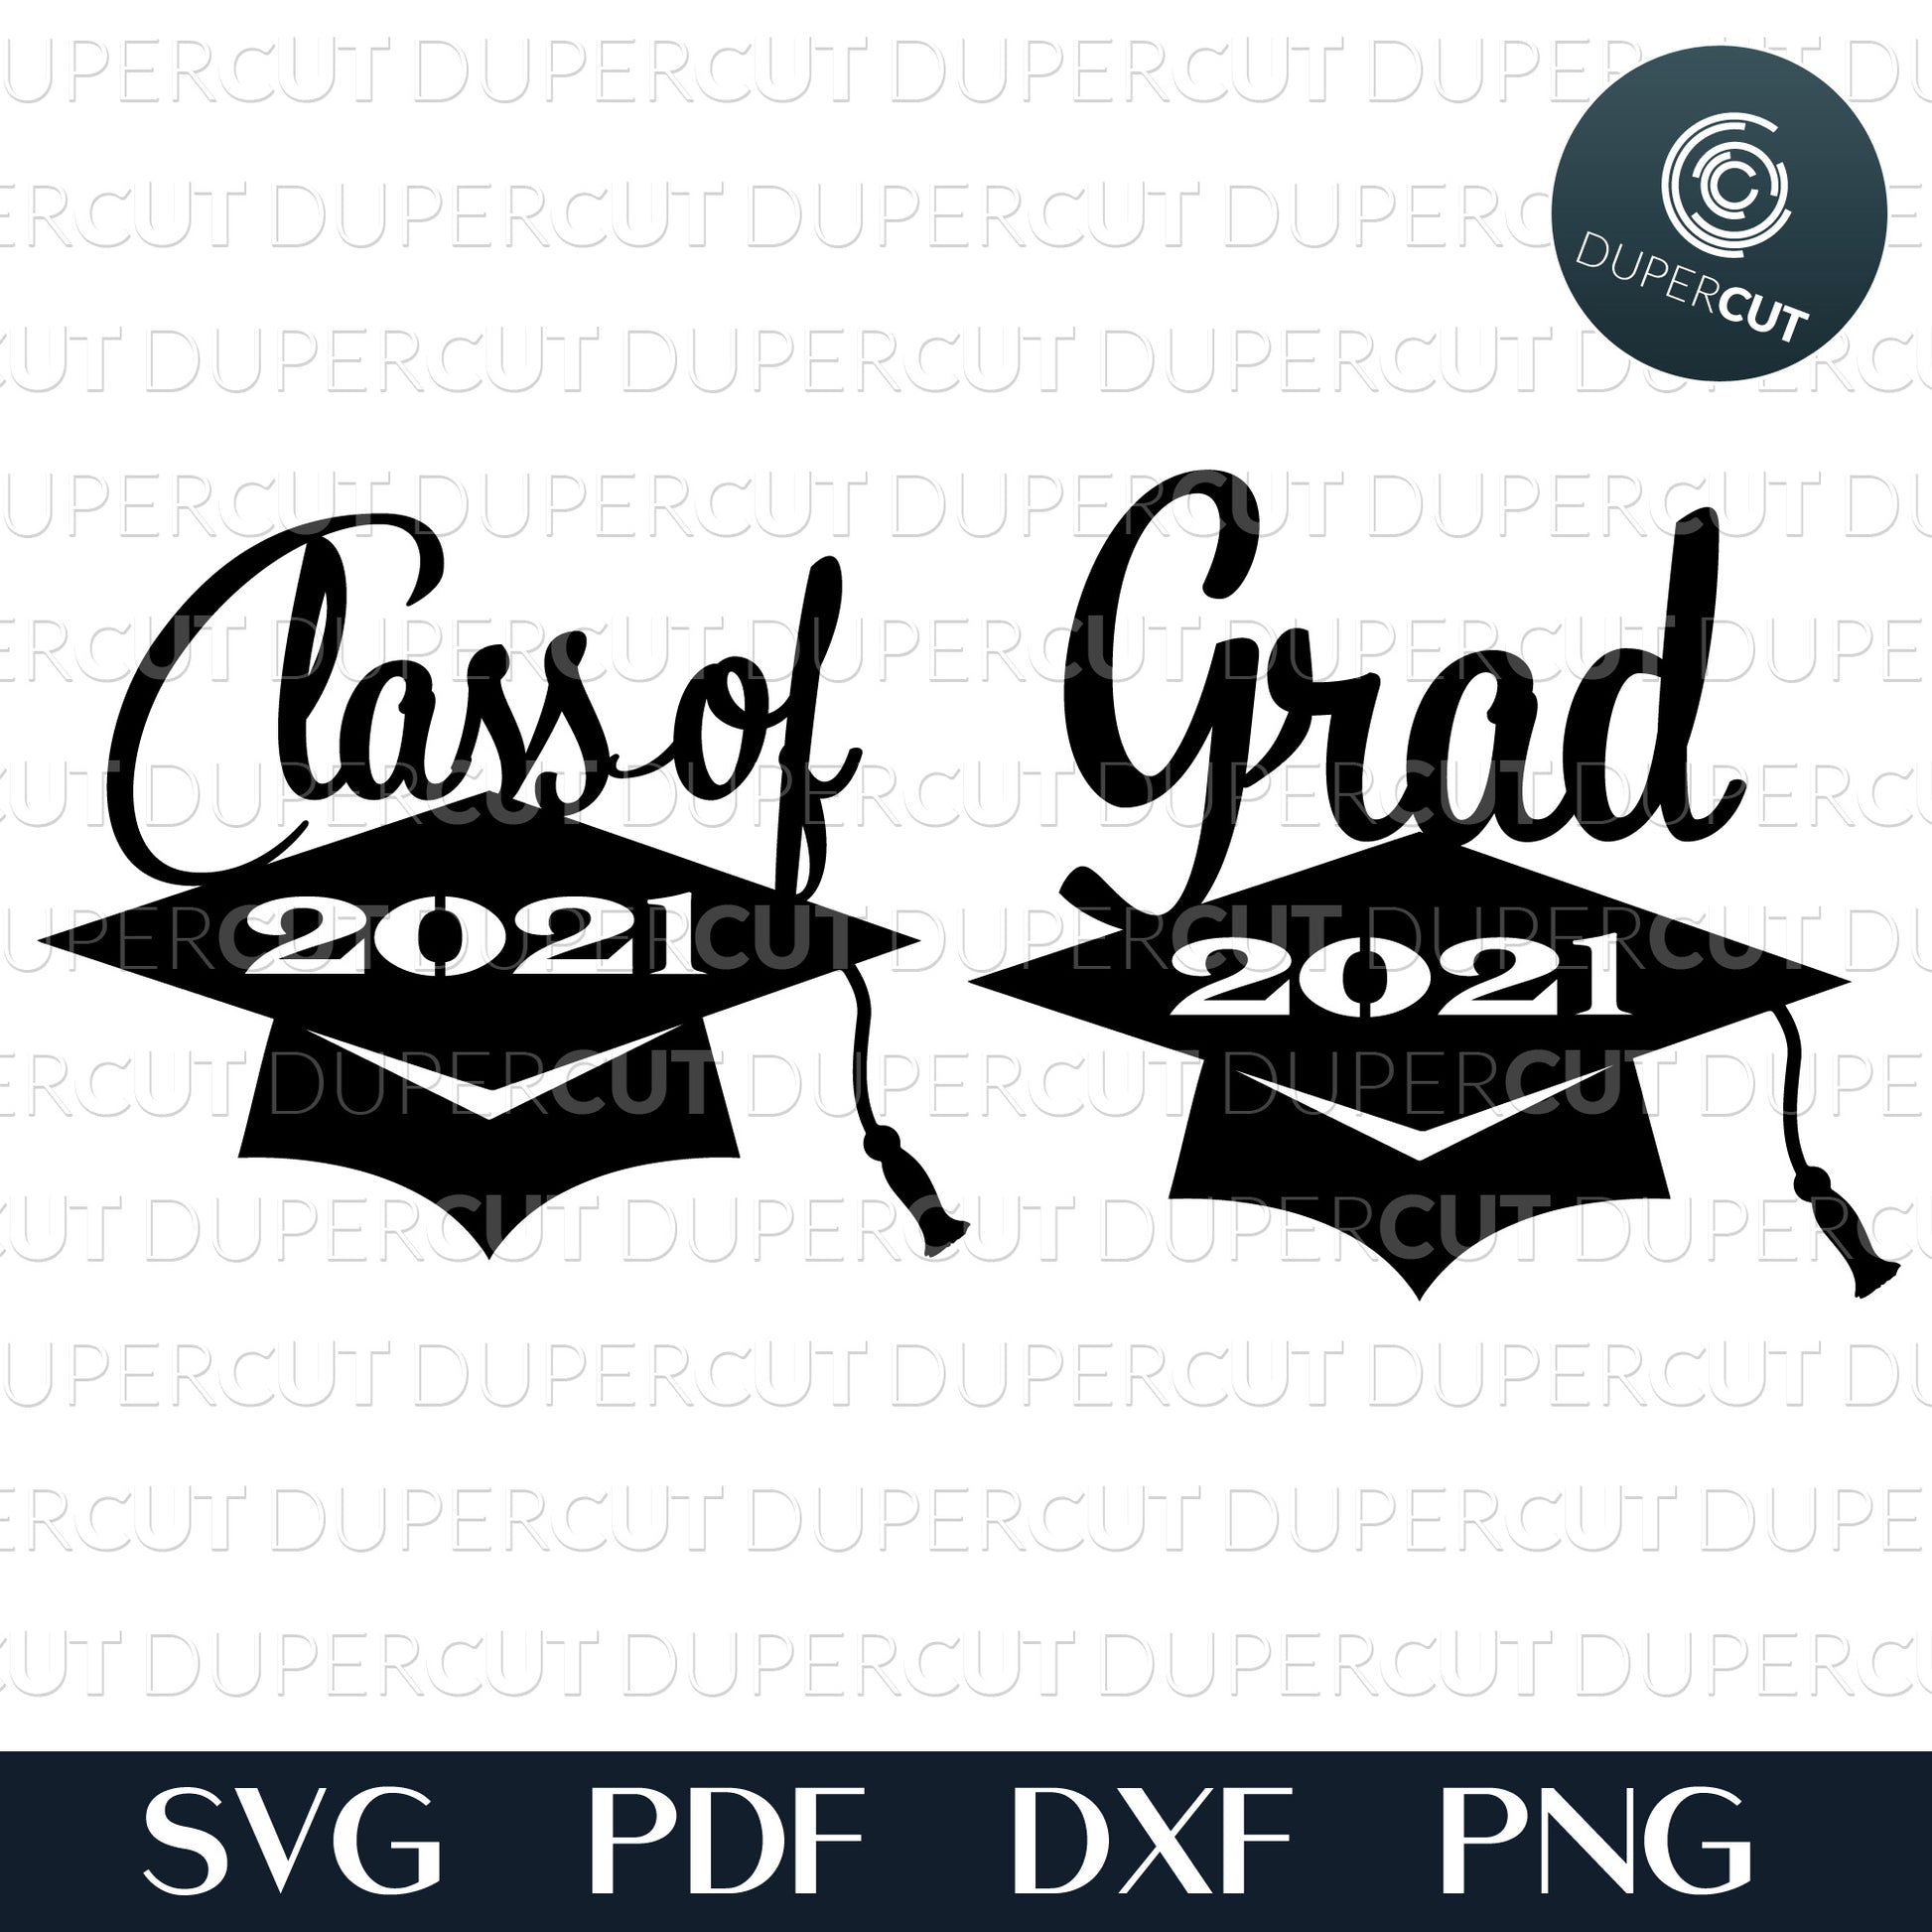 Graduation 2021, cake topper template, SVG PNG DXF files for cutting, laser engraving, scrapbooking. For use with Cricut, Glowforge, Silhouette, CNC machines.